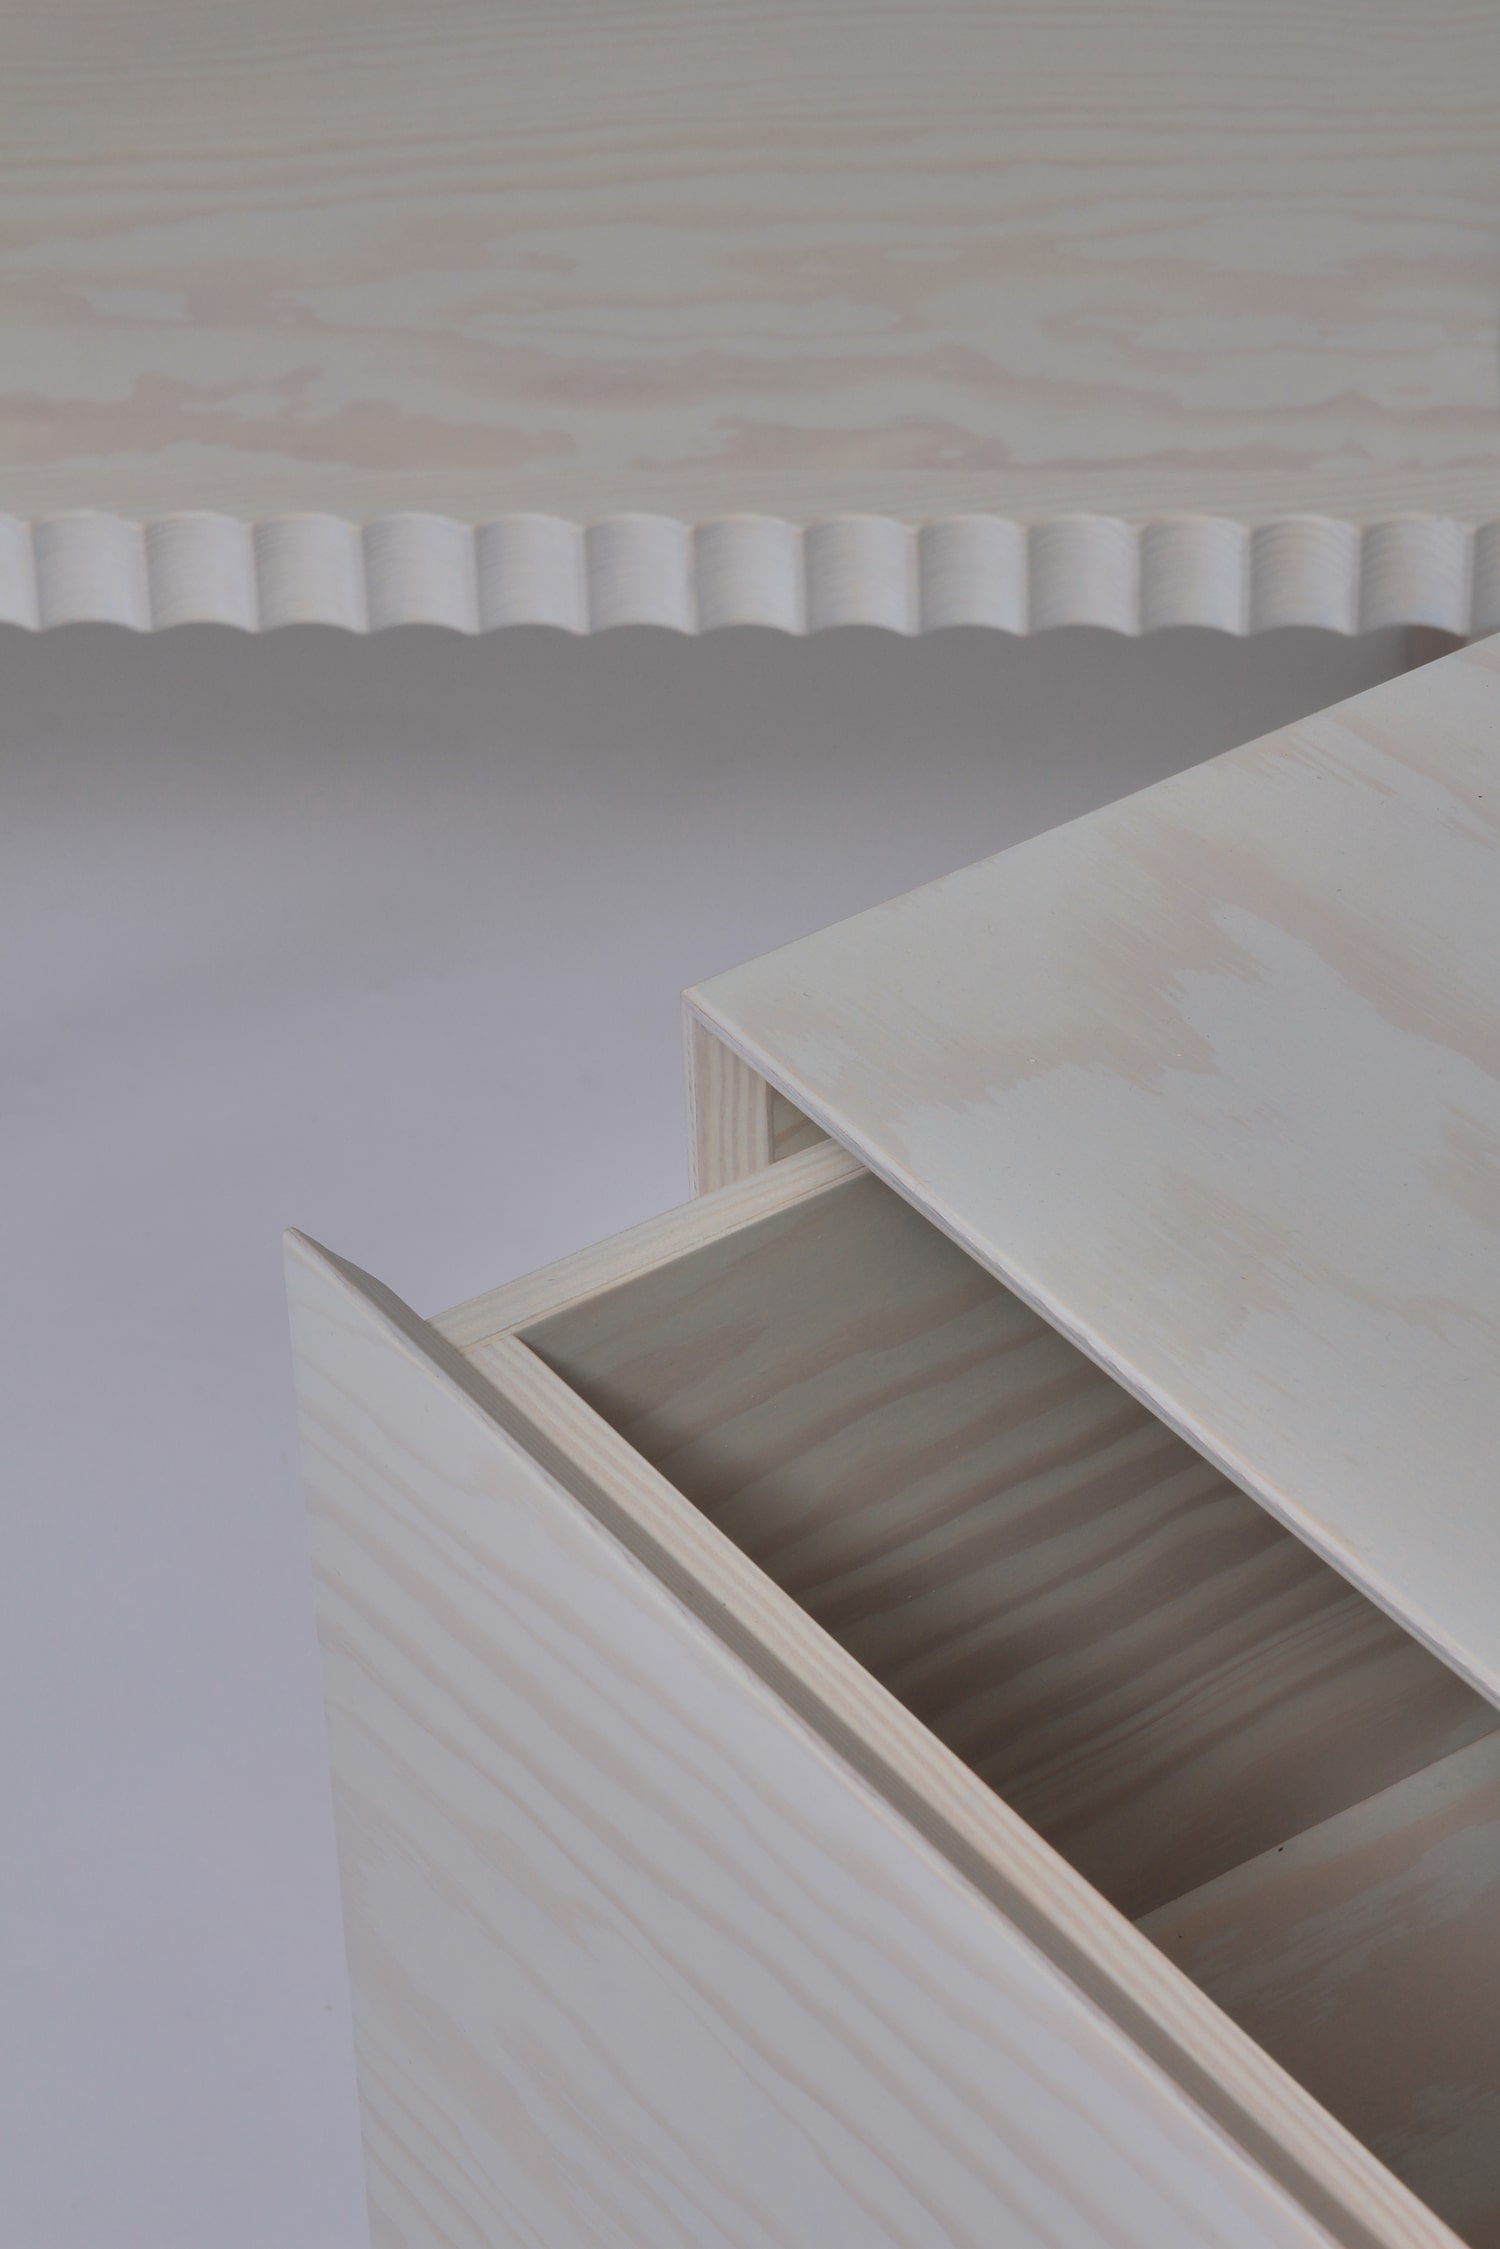 Detailed View of the Limited Edition Nouveau Collection - Commodes with Shelves and storage units by Jiri Krejcirik and pyrography drawings by Taja Spasskova